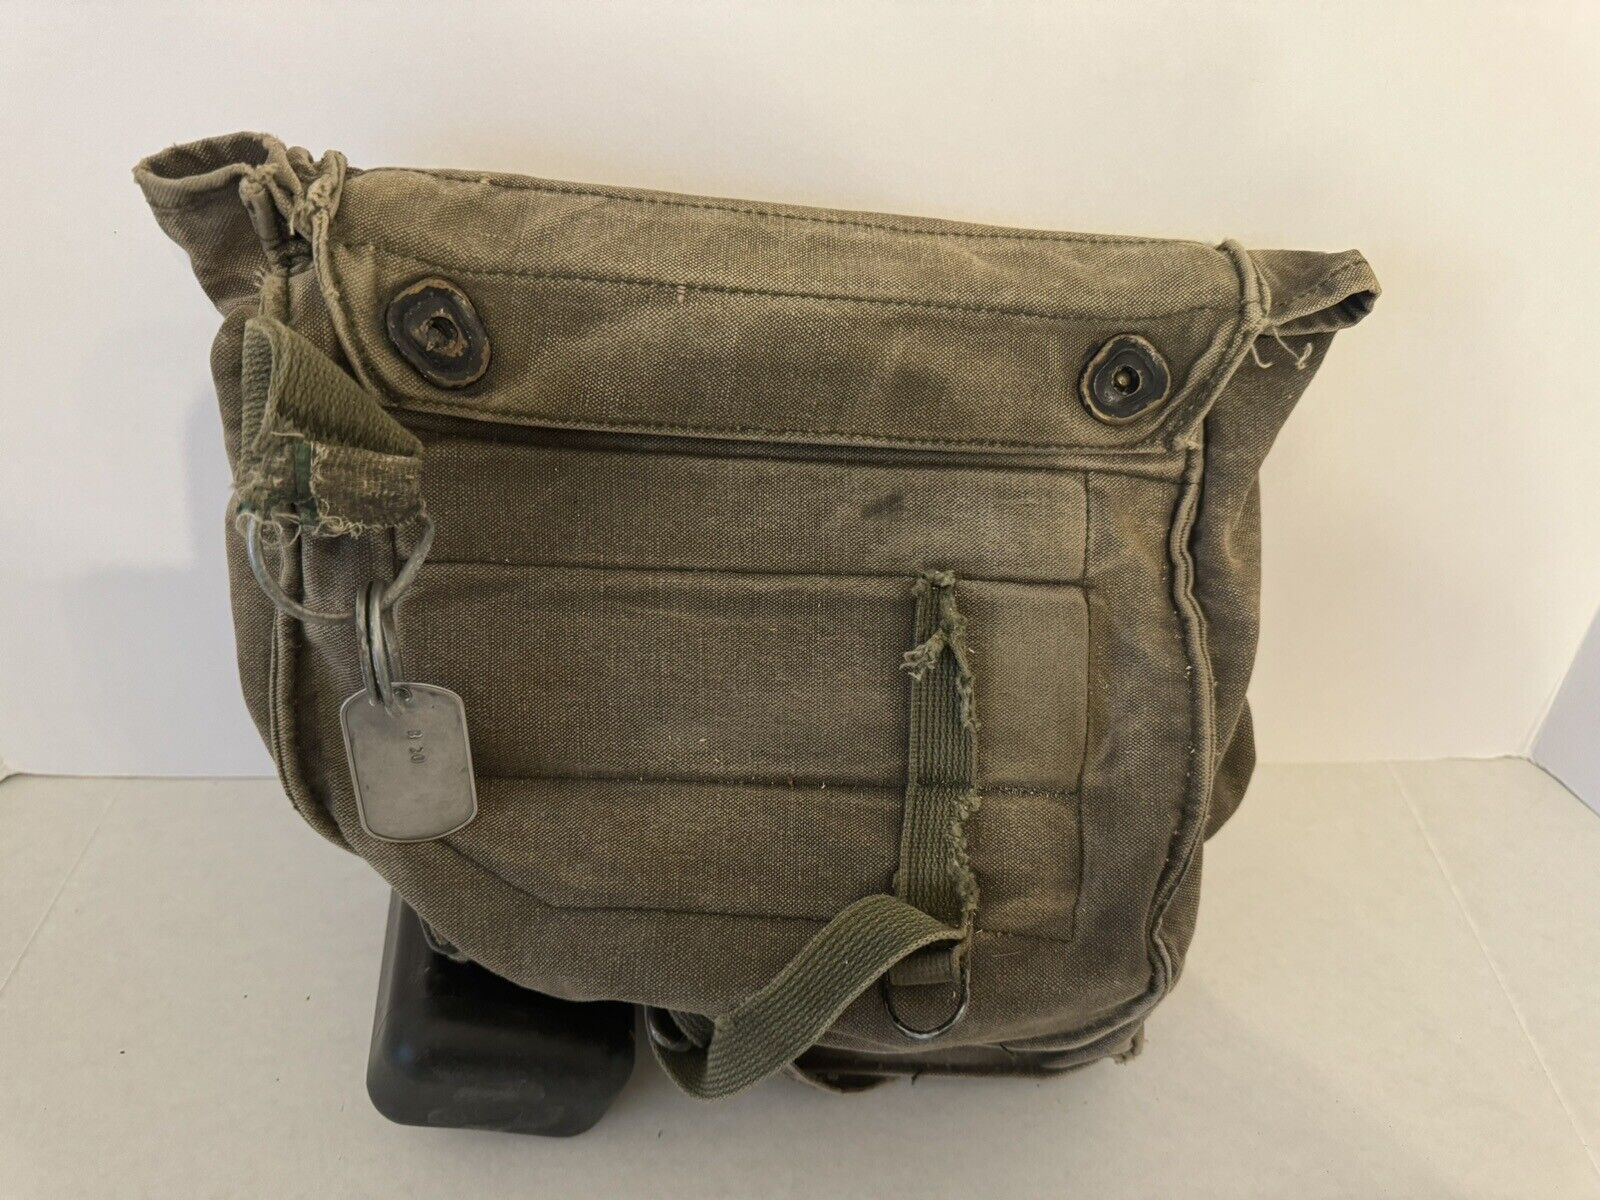 VINTAGE M17 A1 US ARMY GAS MASK Canvas Bag CHEMICAL BIOLOGICAL